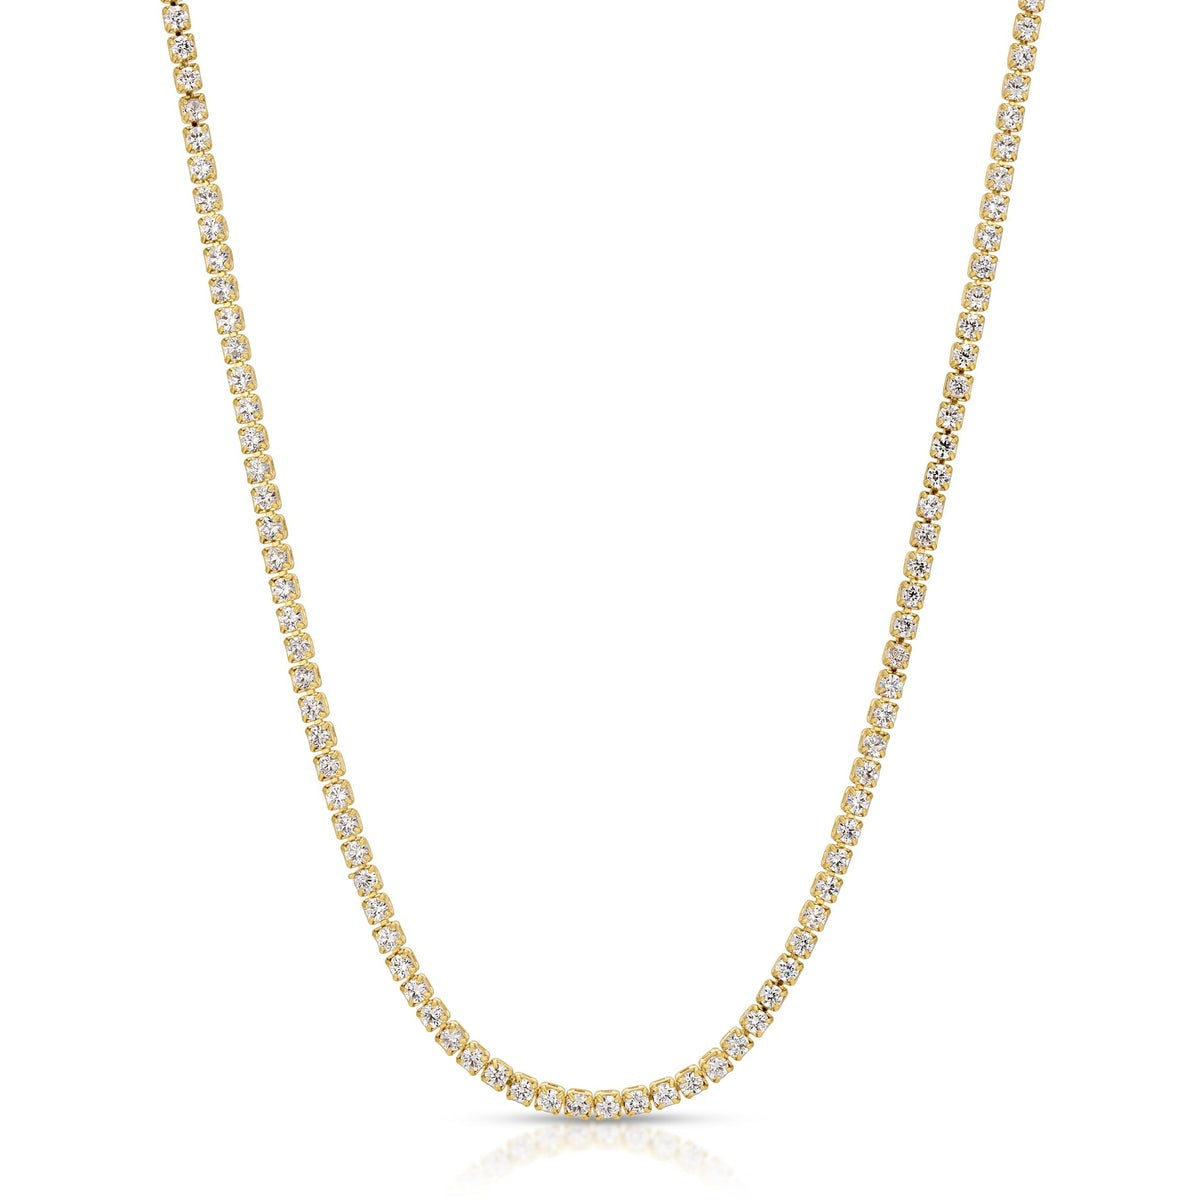 Gracie Tennis Necklace in Gold